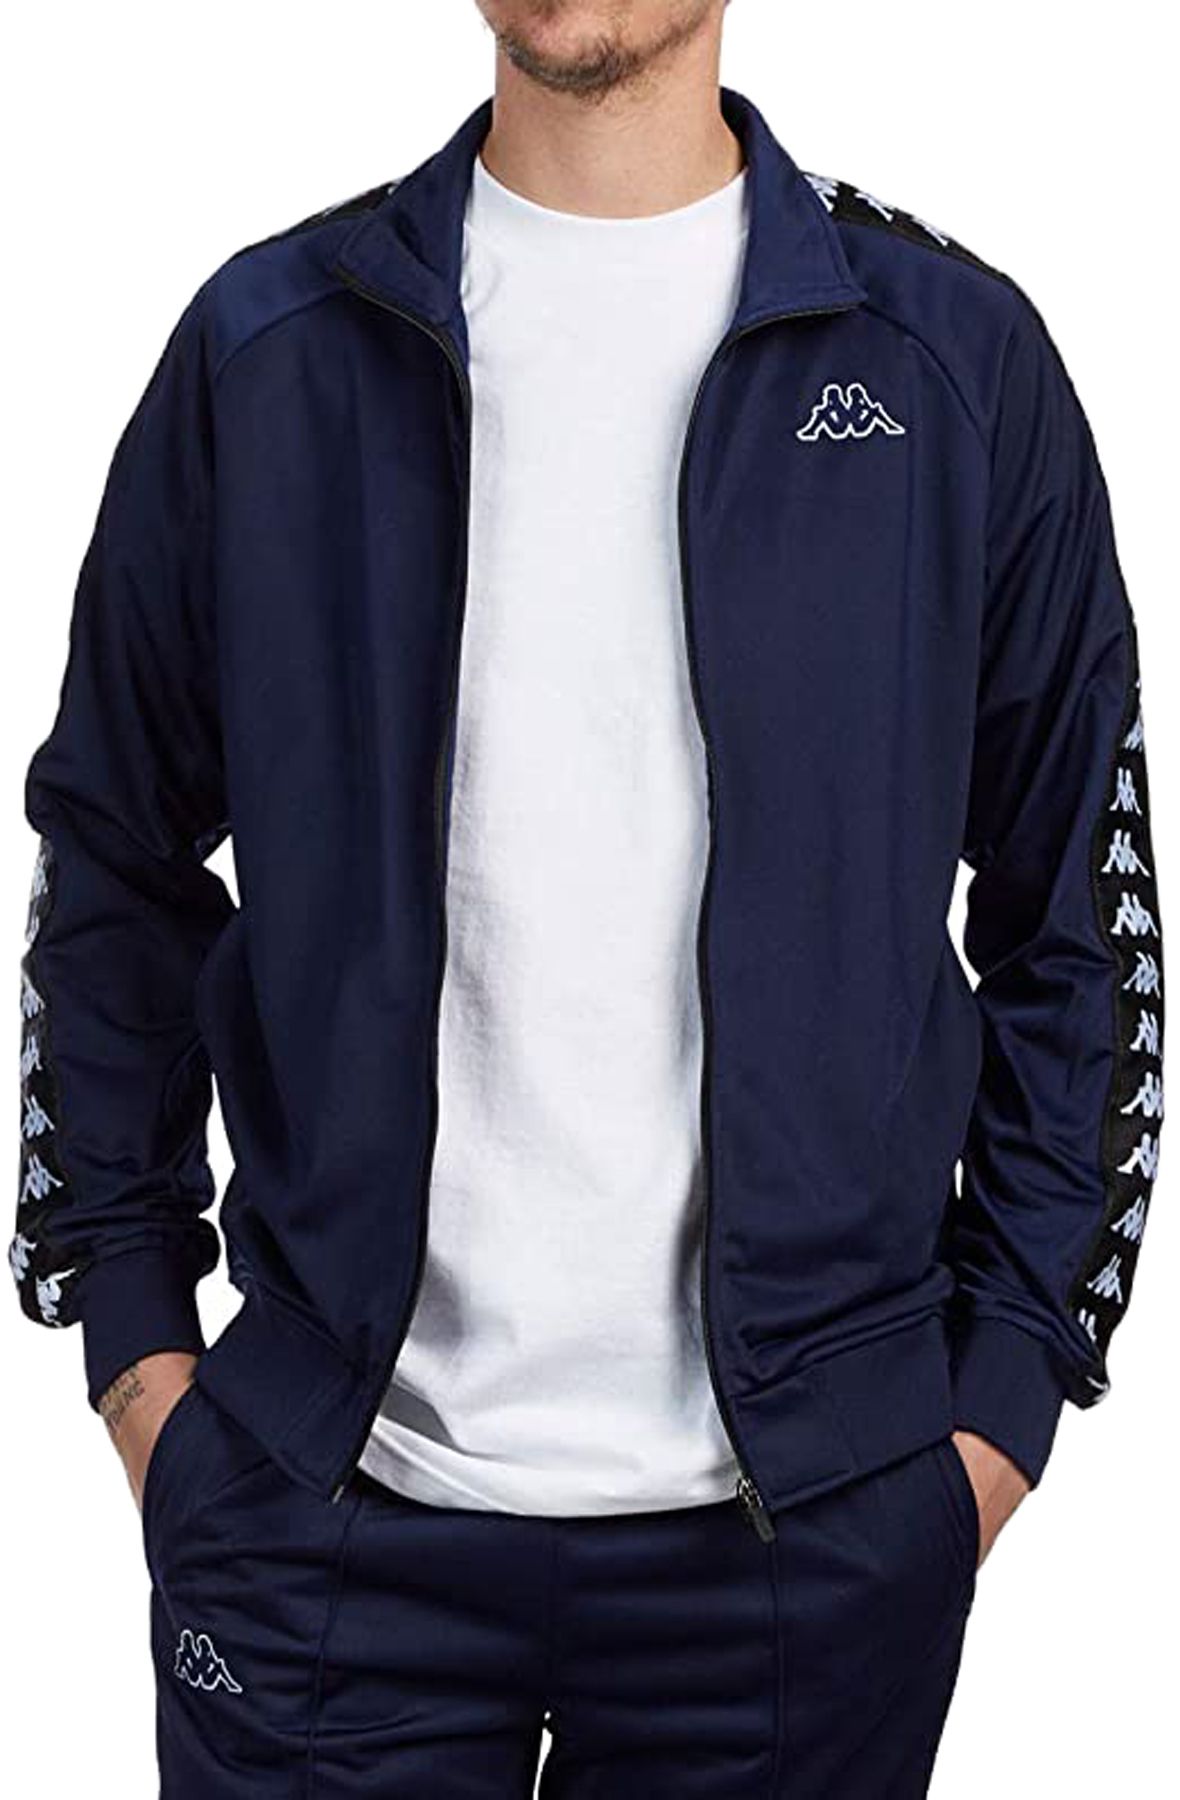 New Young Line Track Jacket Archivio-Maritime Blue/ White Maritime Blue/White / MD